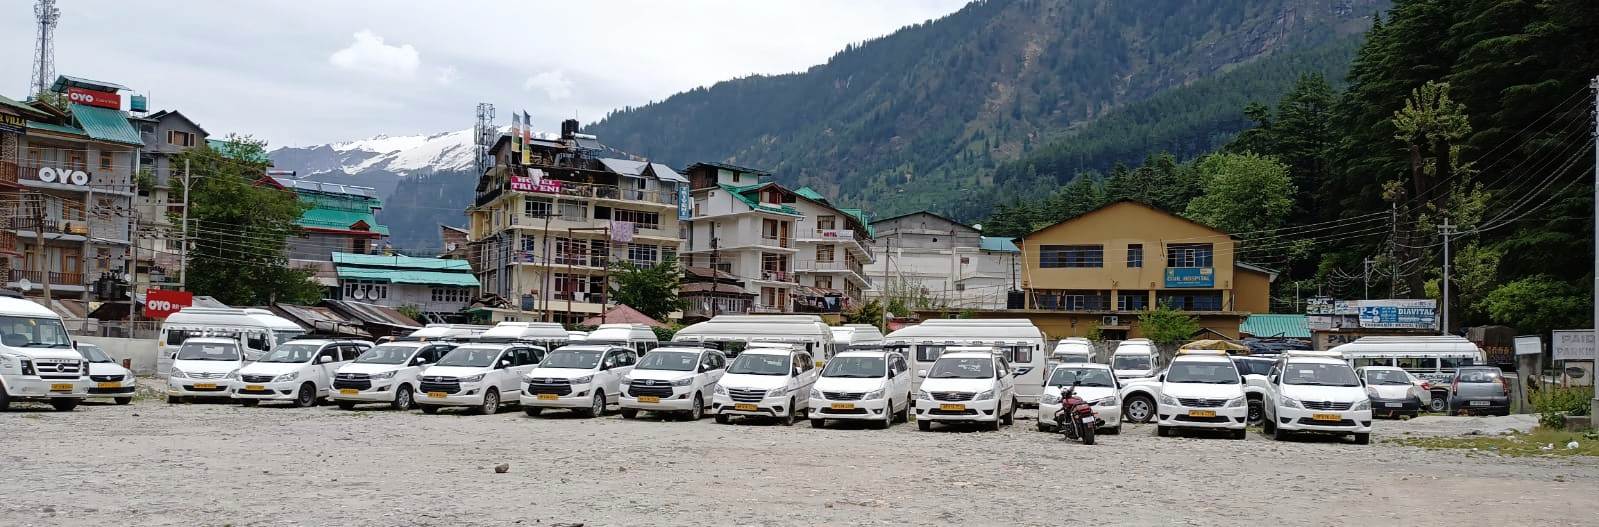 Manali Taxi Service - manalitaxi.in